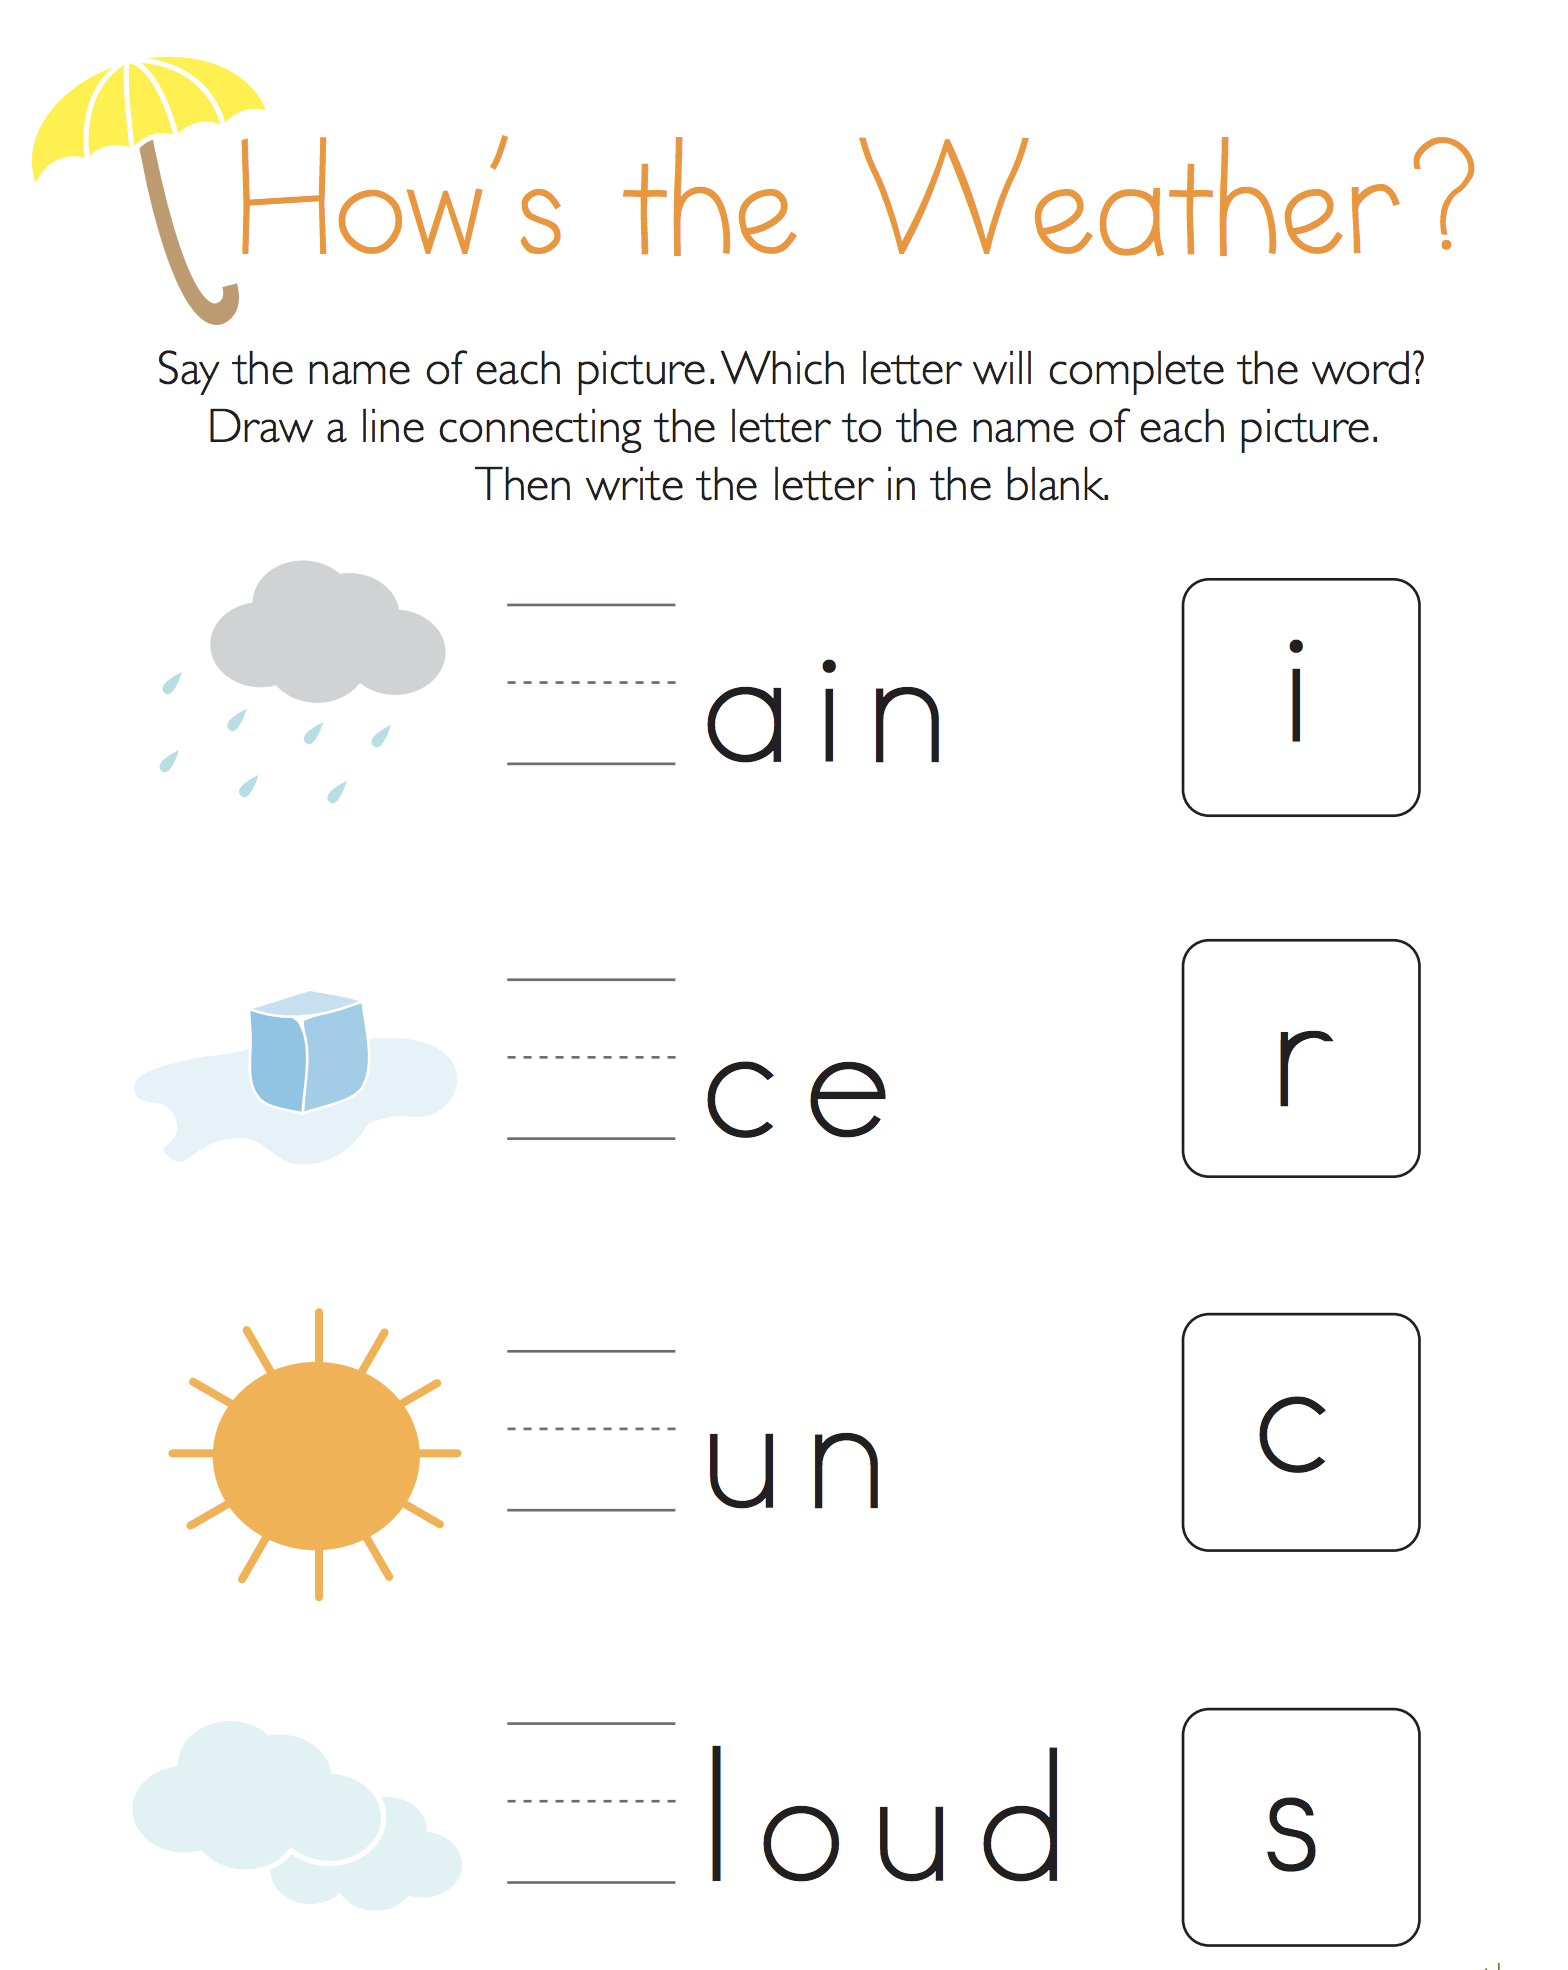 Write the Missing Letter: How's the Weather?